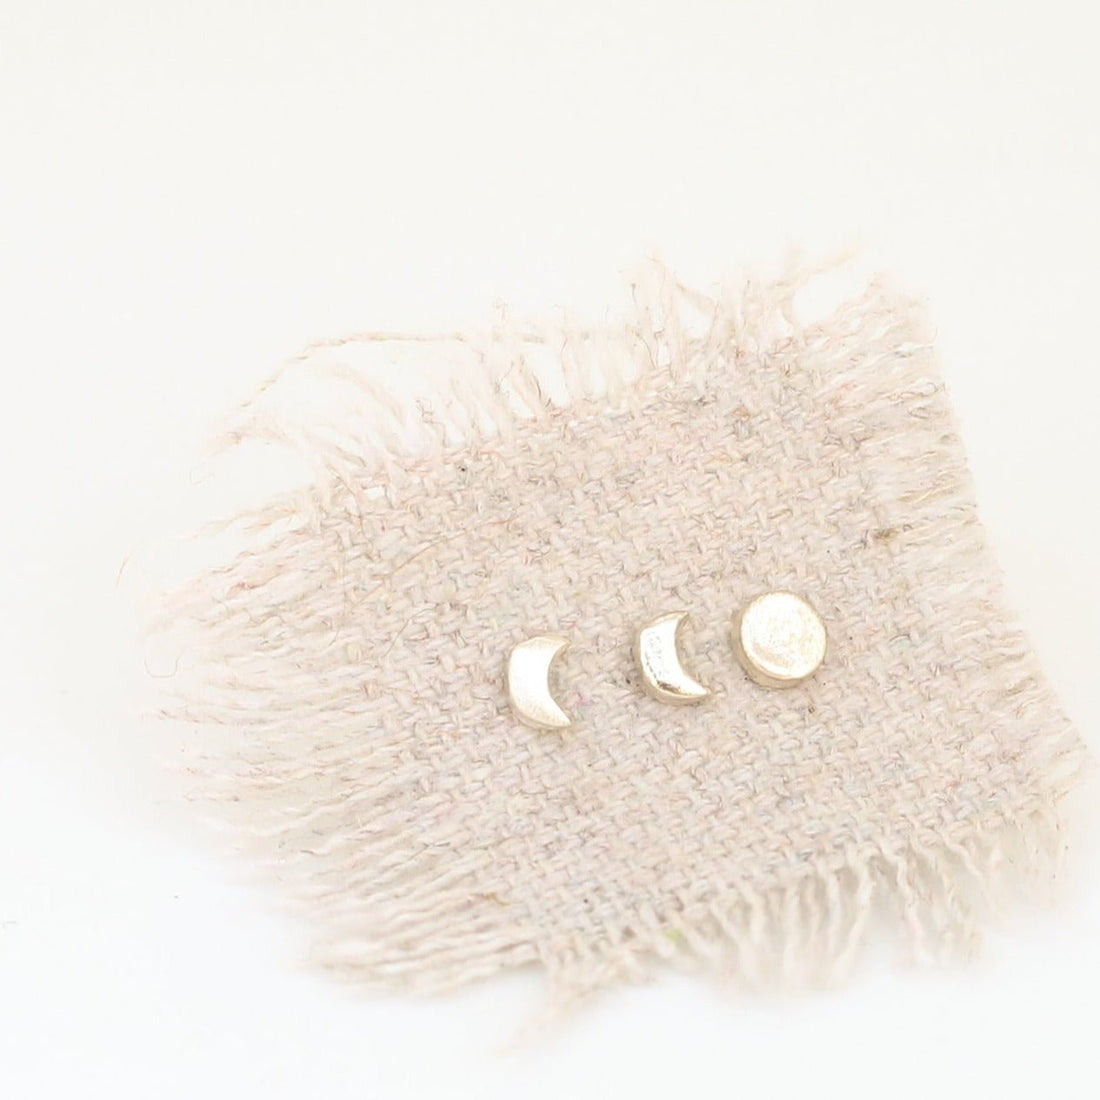 Moon Phase Trio - Full Moon, Crescent Moon Stud Earrings - Chocolate and Steel